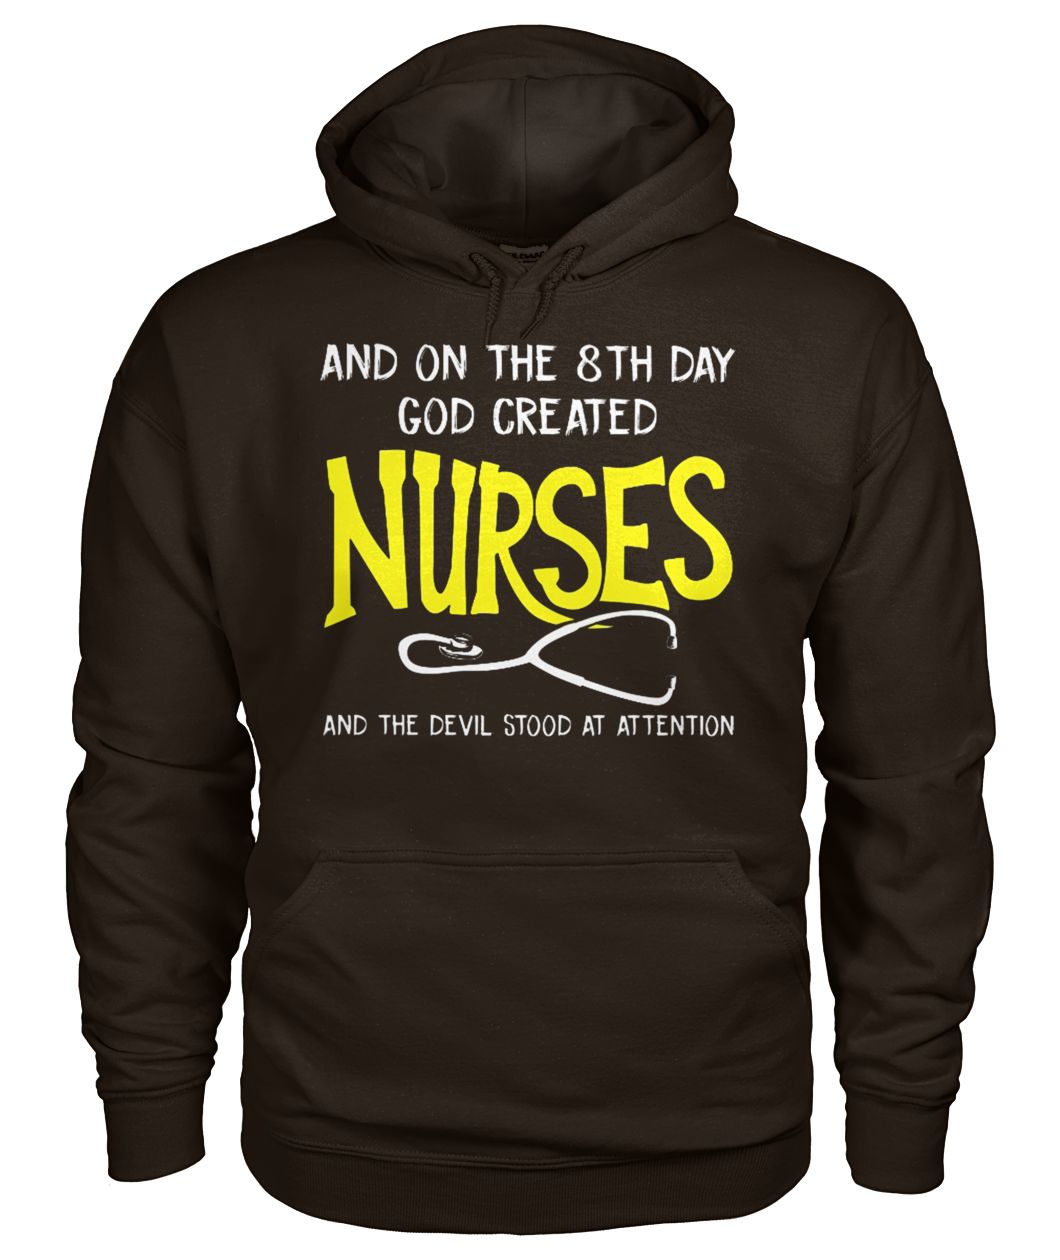 On the 8th day god made a nurse and the devil stood at attention gildan hoodie